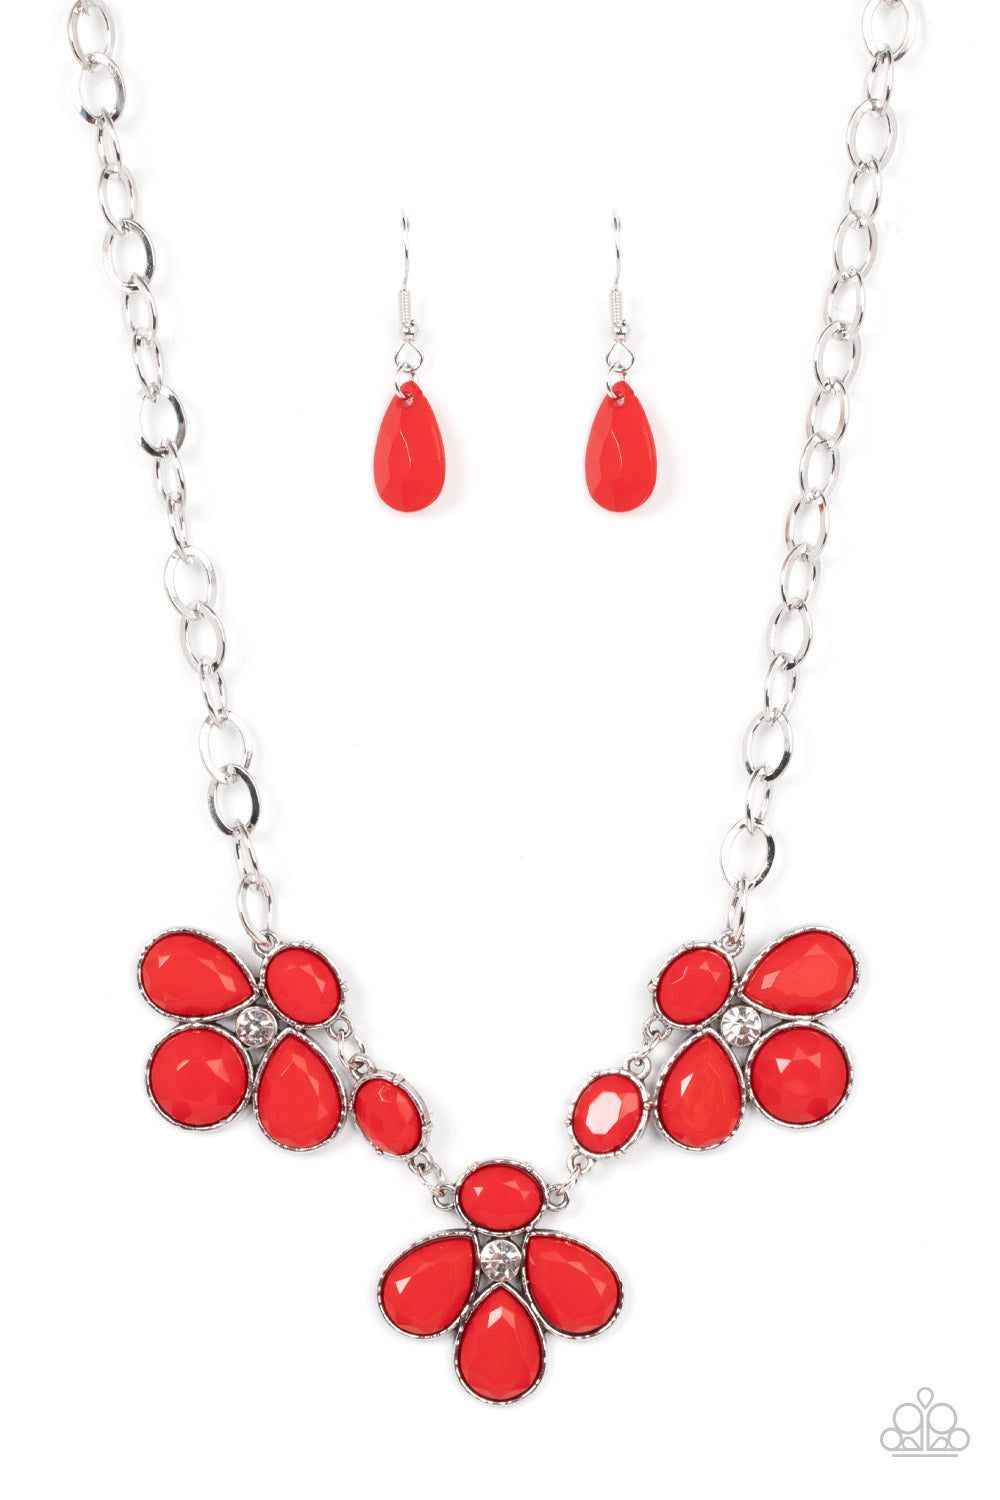 SELFIE-Worth - Red Paparazzi Necklace